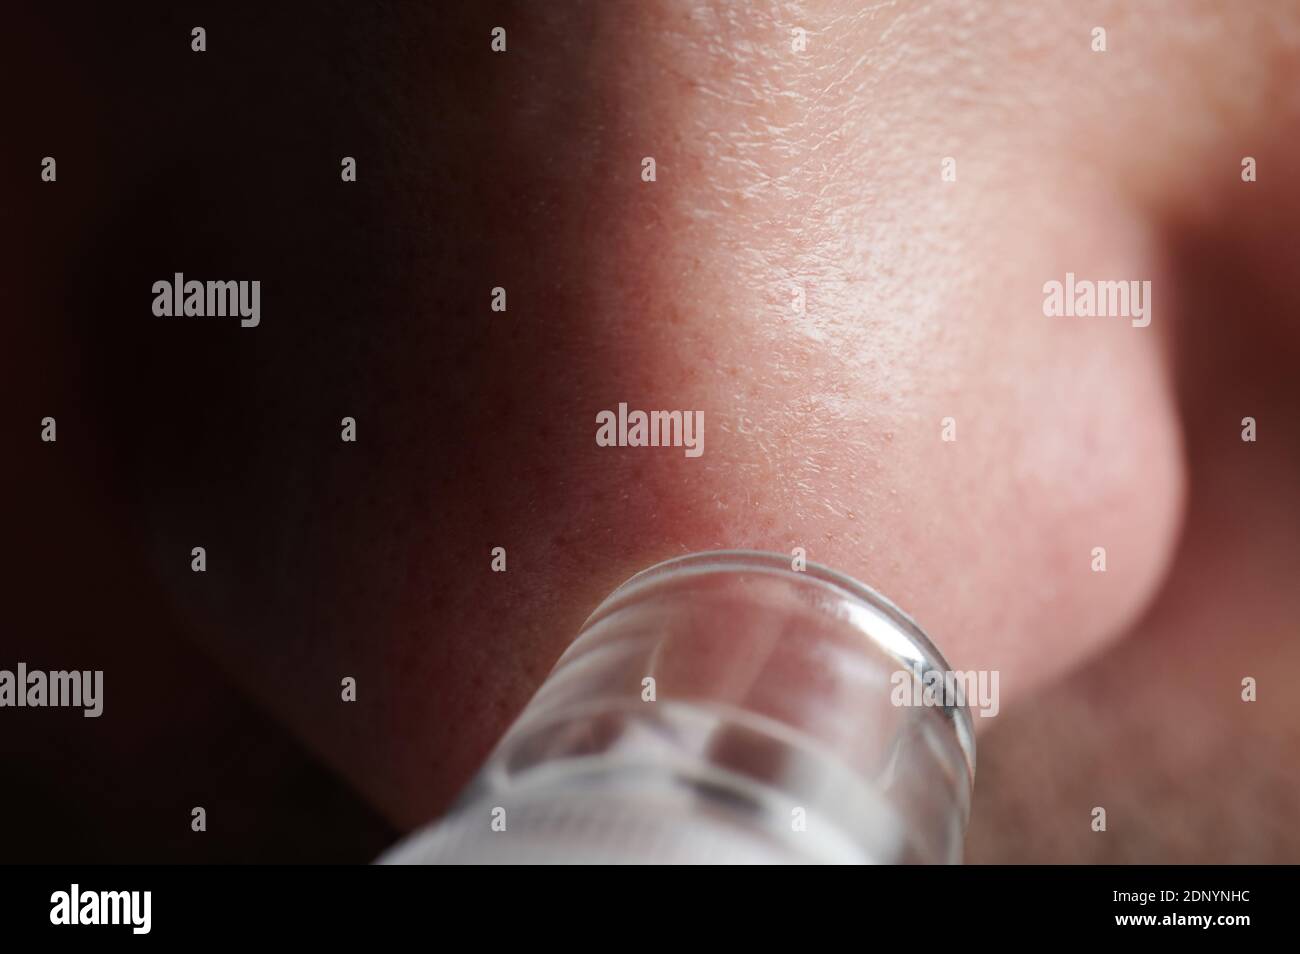 Blackhead skin treatment with cosmetic suction tool macro close up view Stock Photo